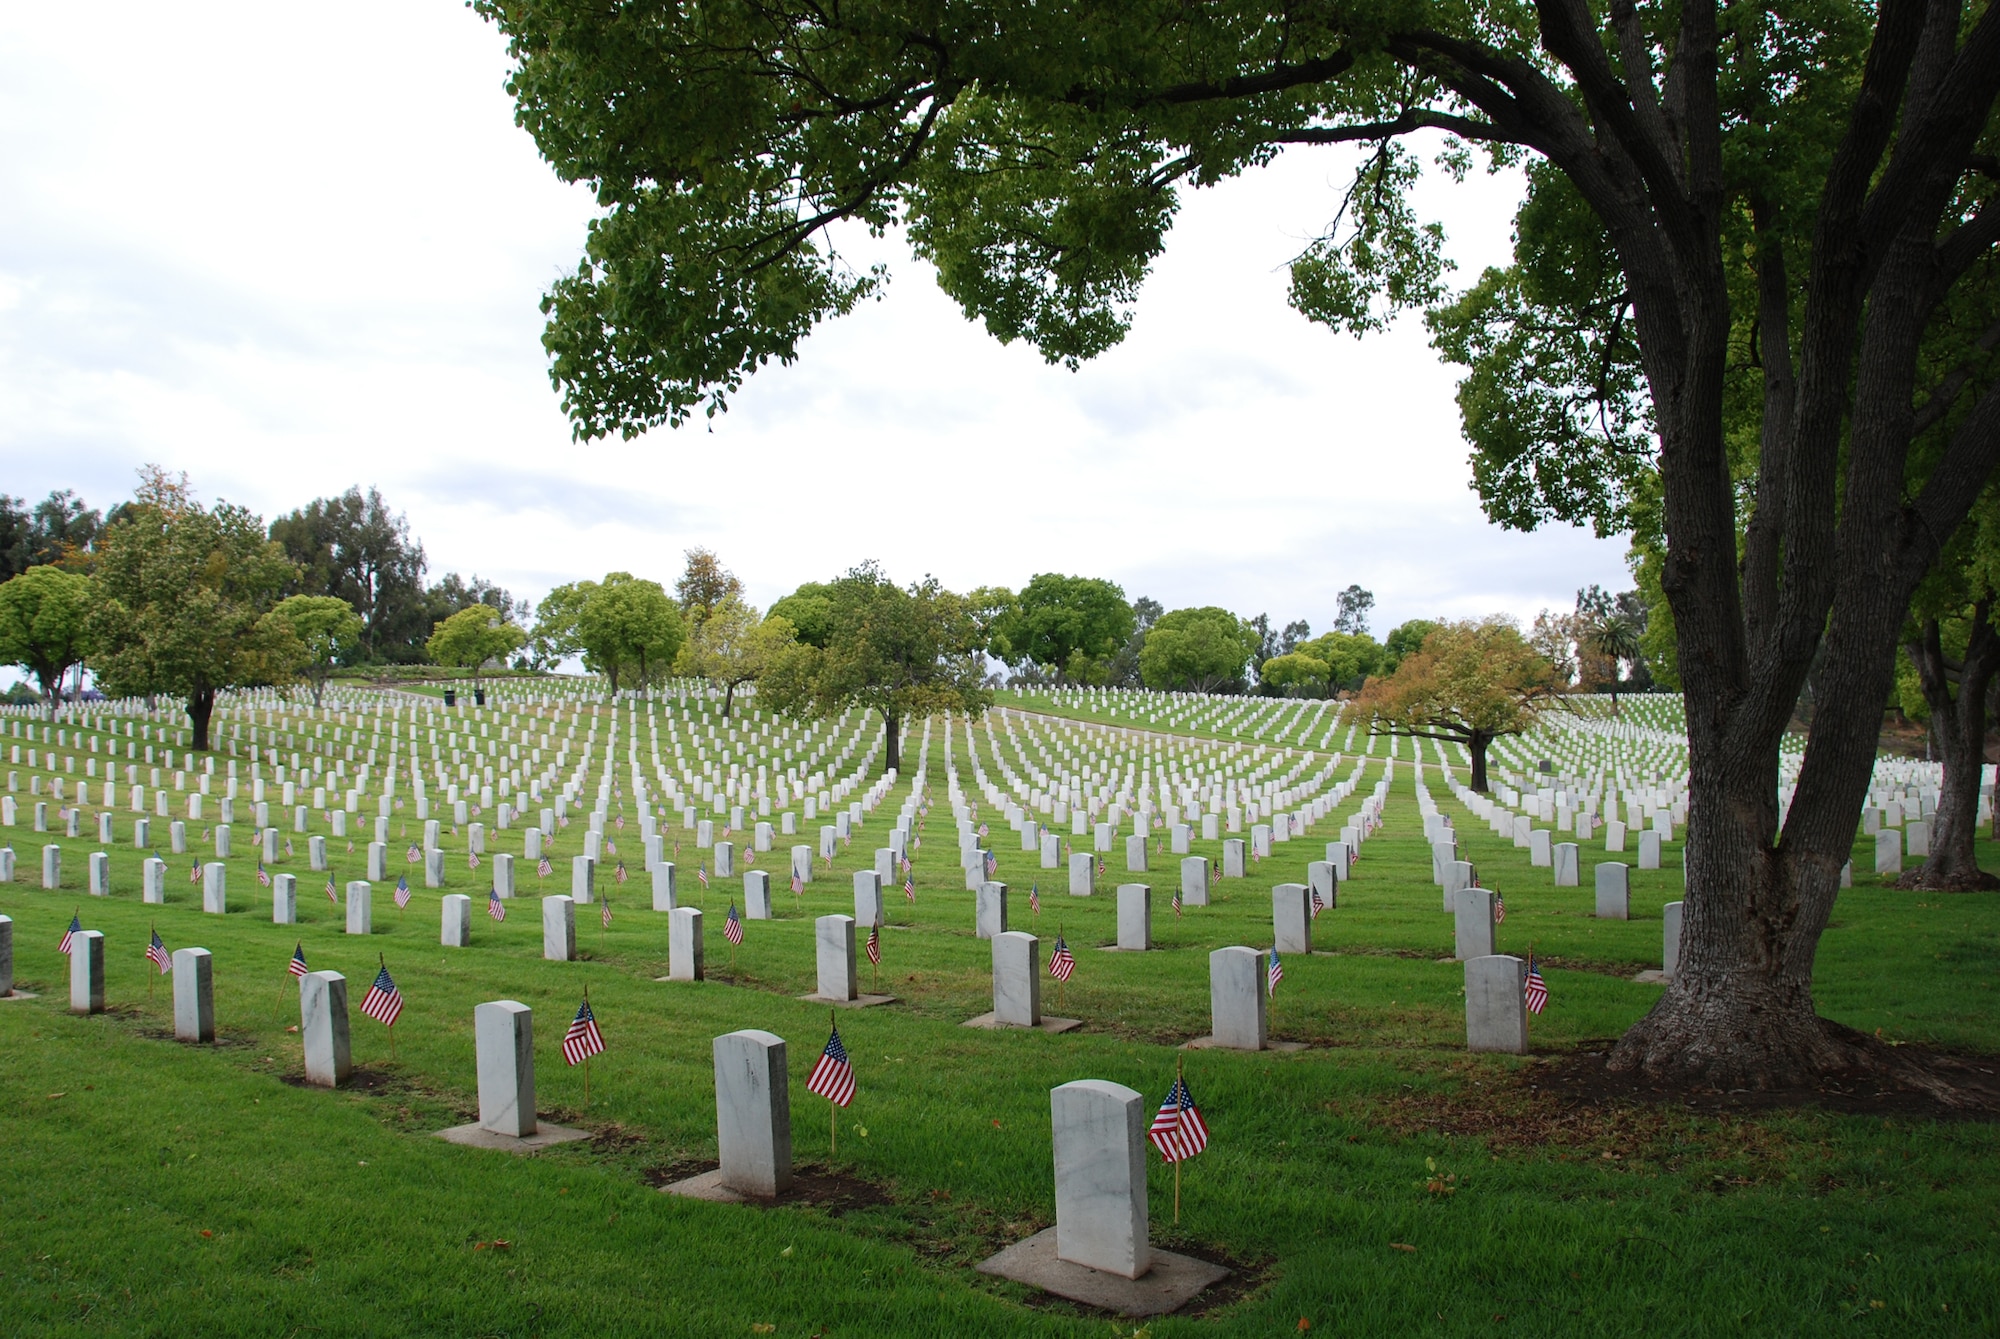 In a tribute to veterans, graves at the Los Angeles National Cemetery were decorated with flags on Memorial Day, May 16. (Photo courtesy of the Greater Los Angeles VA)